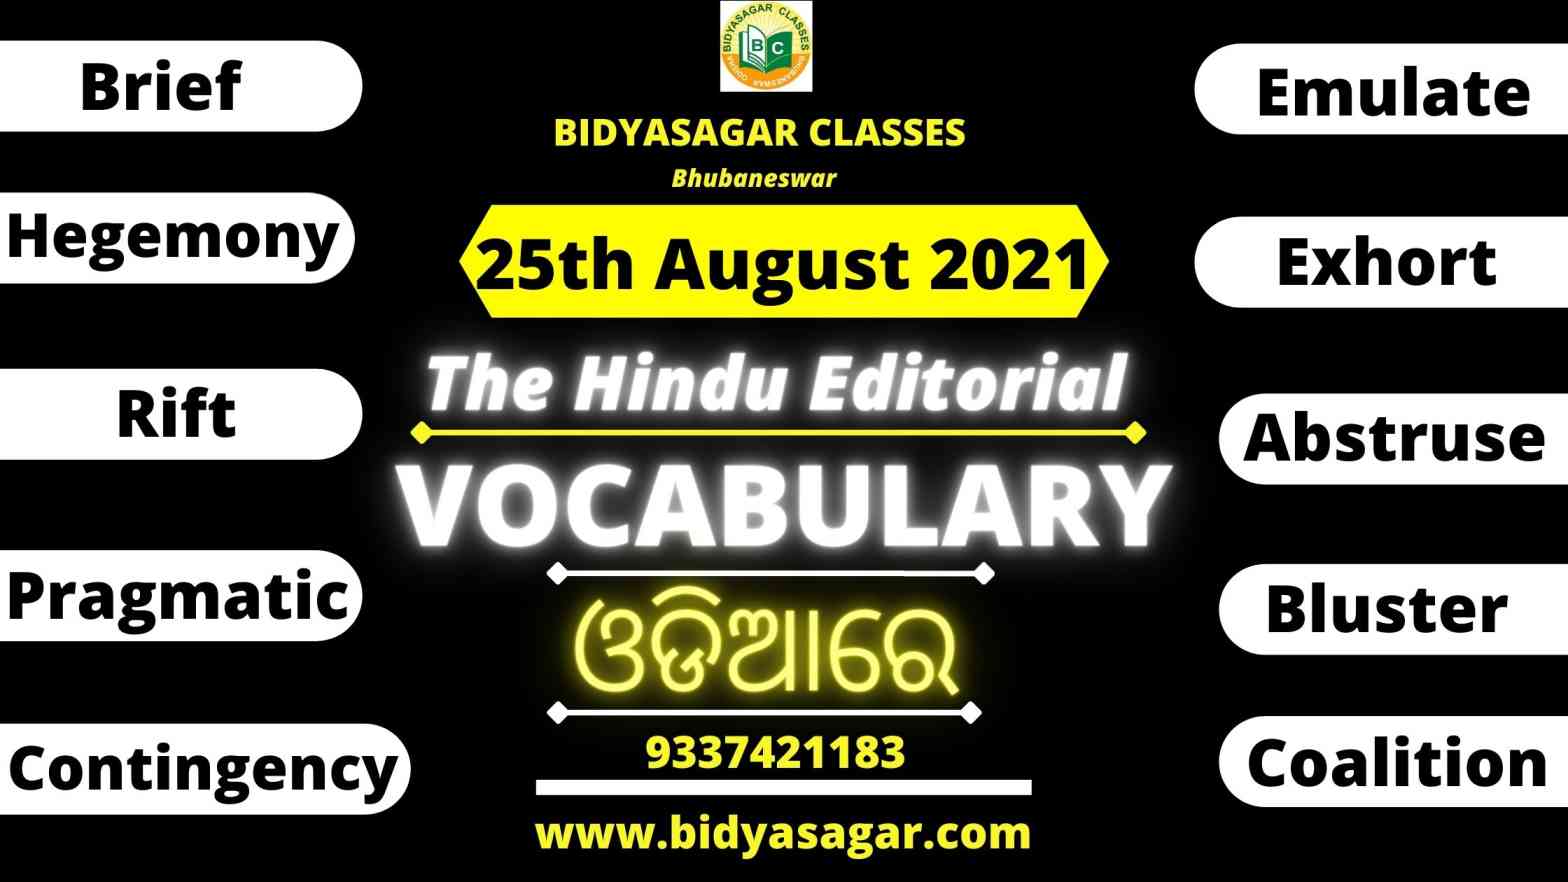 The Hindu Editorial Vocabulary of 25th August 2021